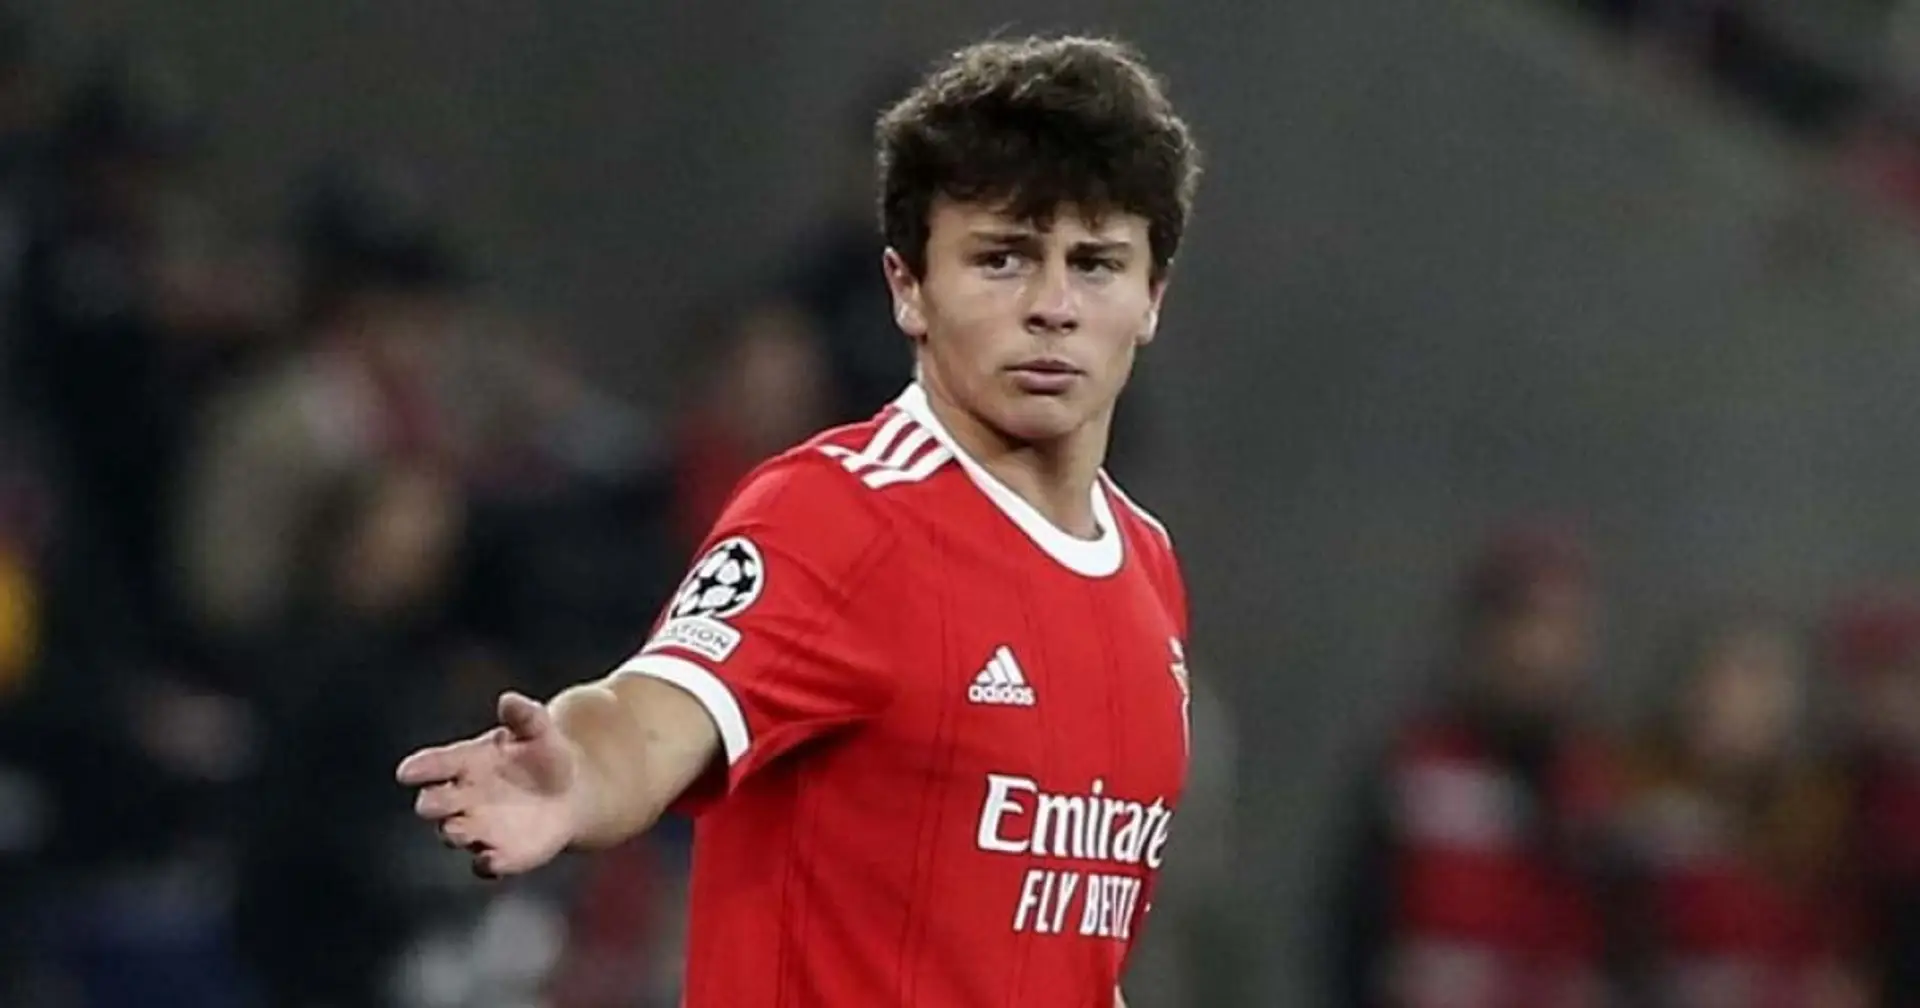 Man United send scouts to watch Benfica teenager and 2 more under-radar Man United stories 